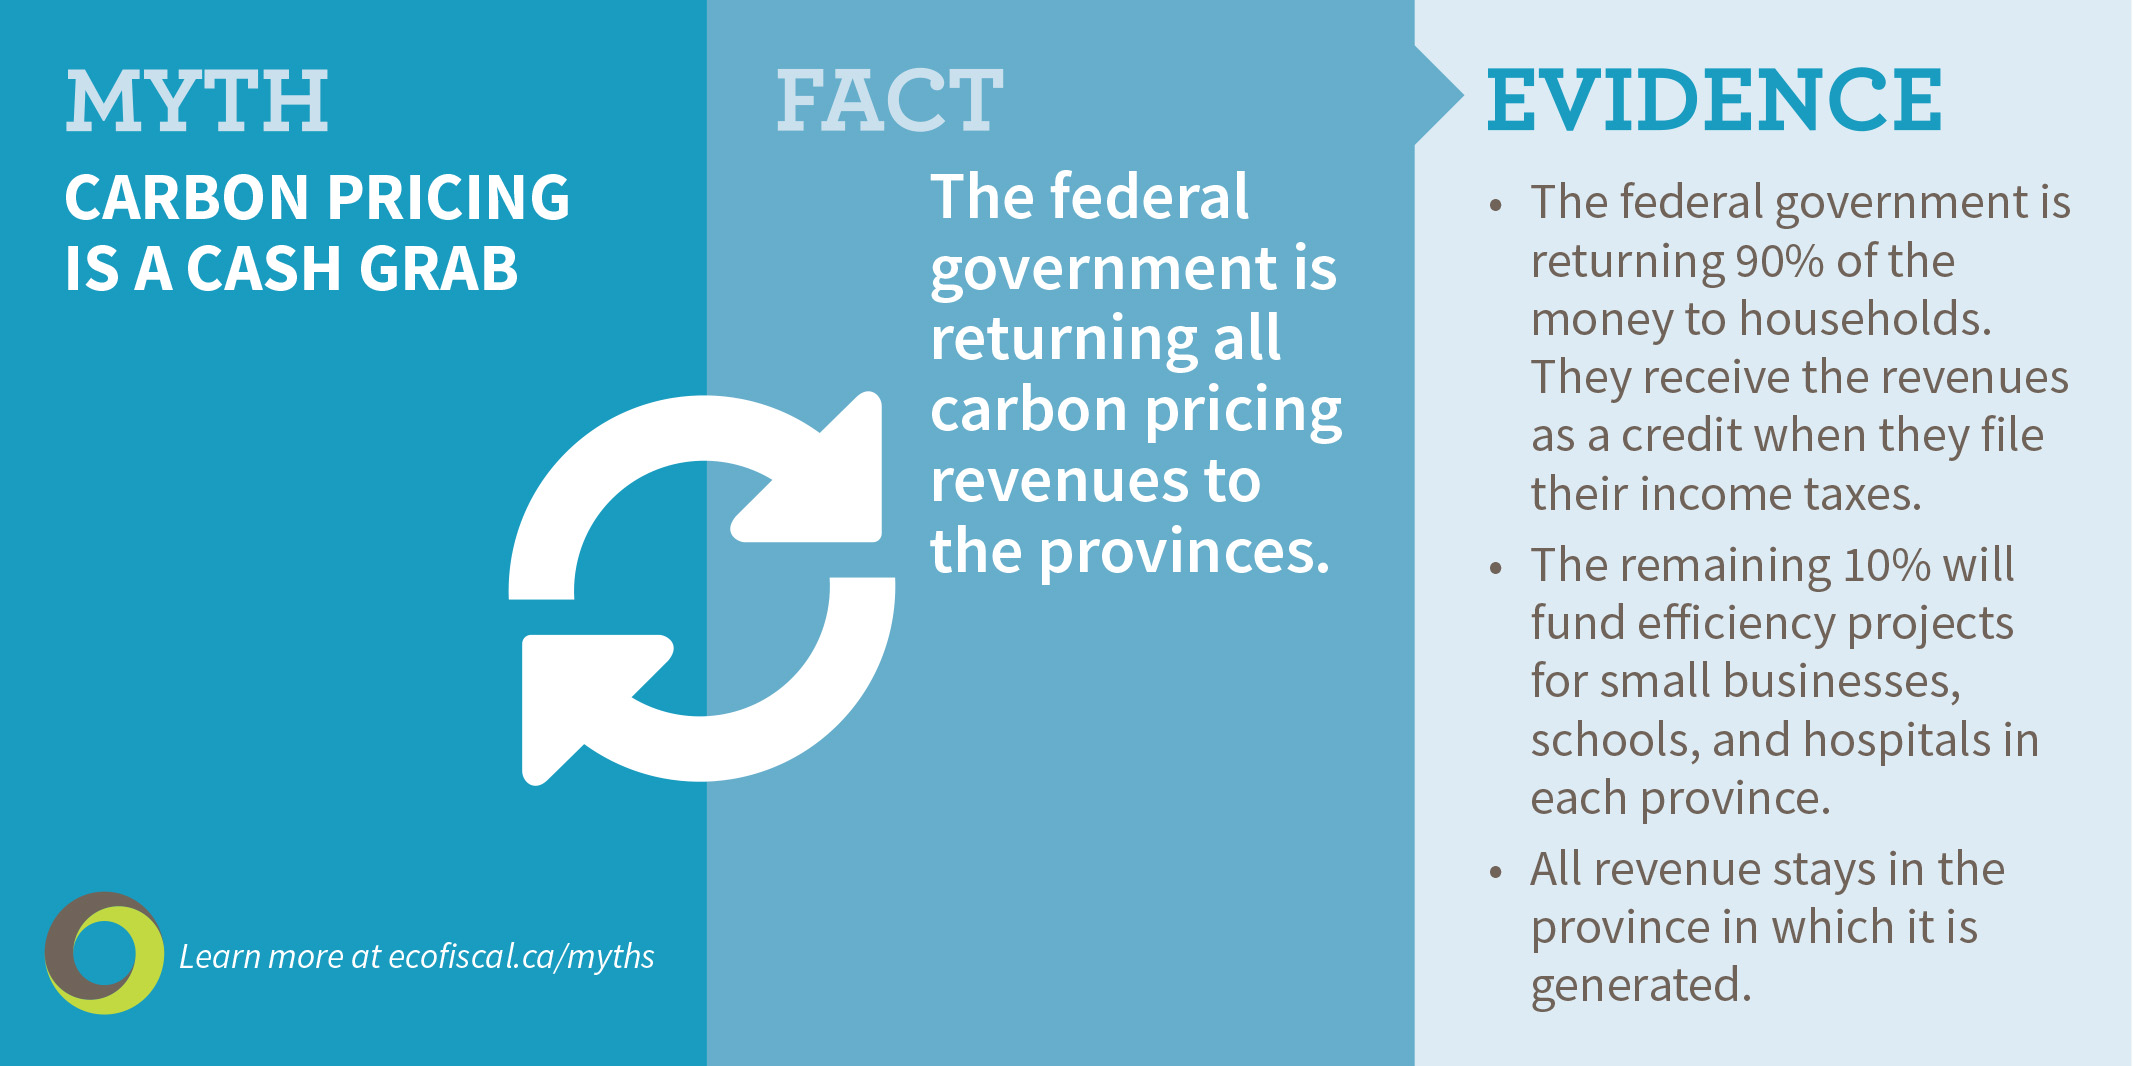 Myth #6: Carbon pricing is a cash grab